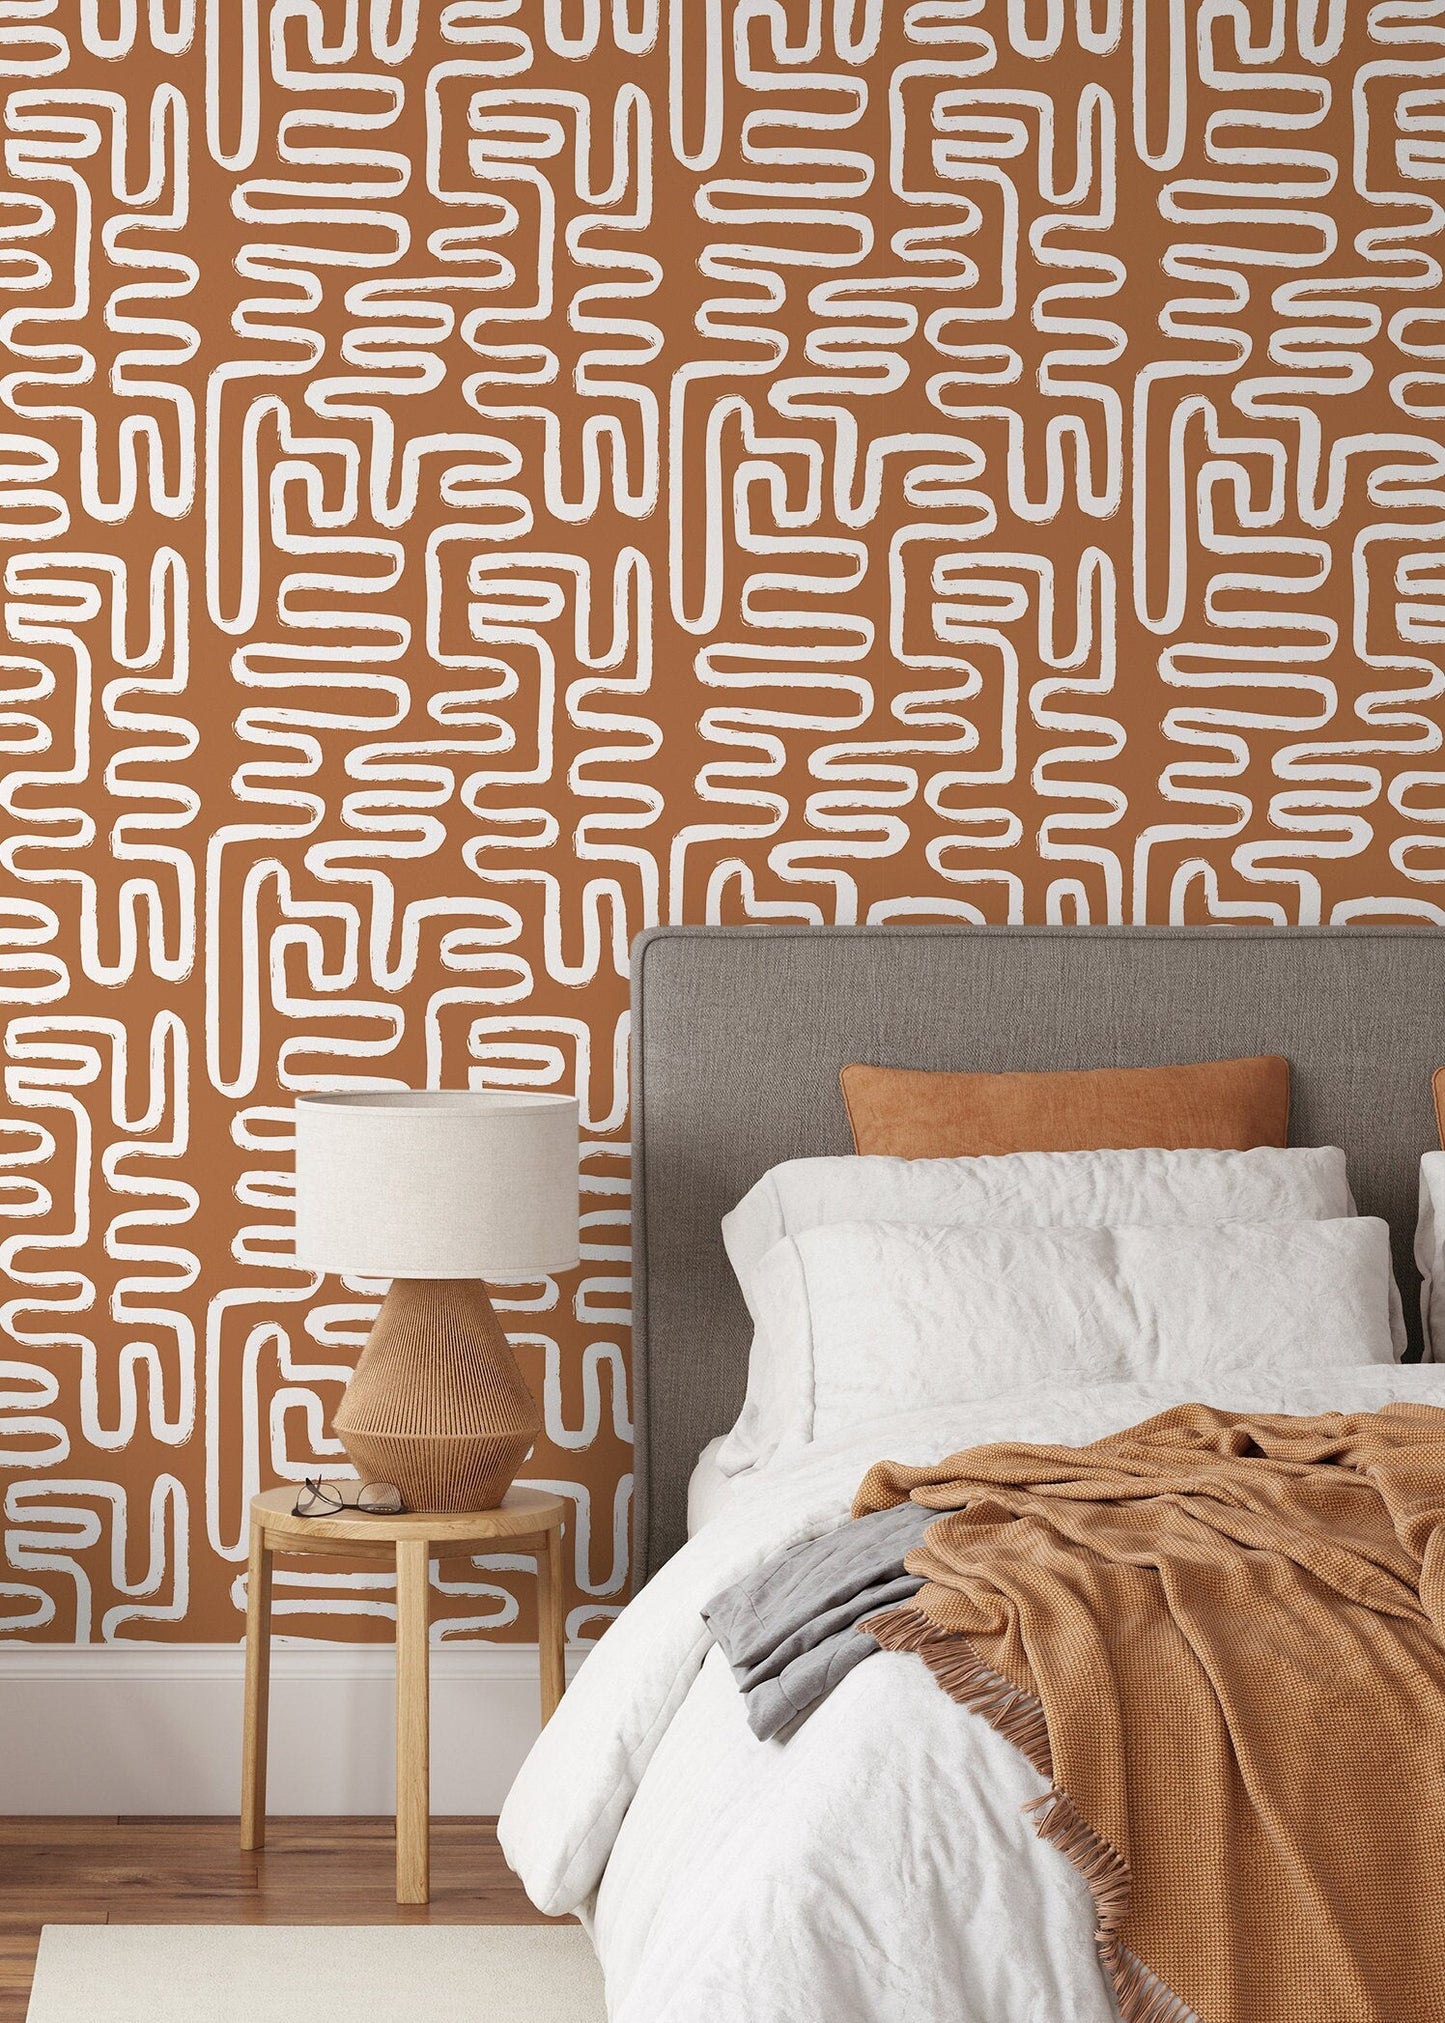 Seamless Rounded Lines Wallpaper Peel and Stick Removable Repositionable Brown Minimalist Light Abstract Brush Strokes Boho Moderne - ZAAJ